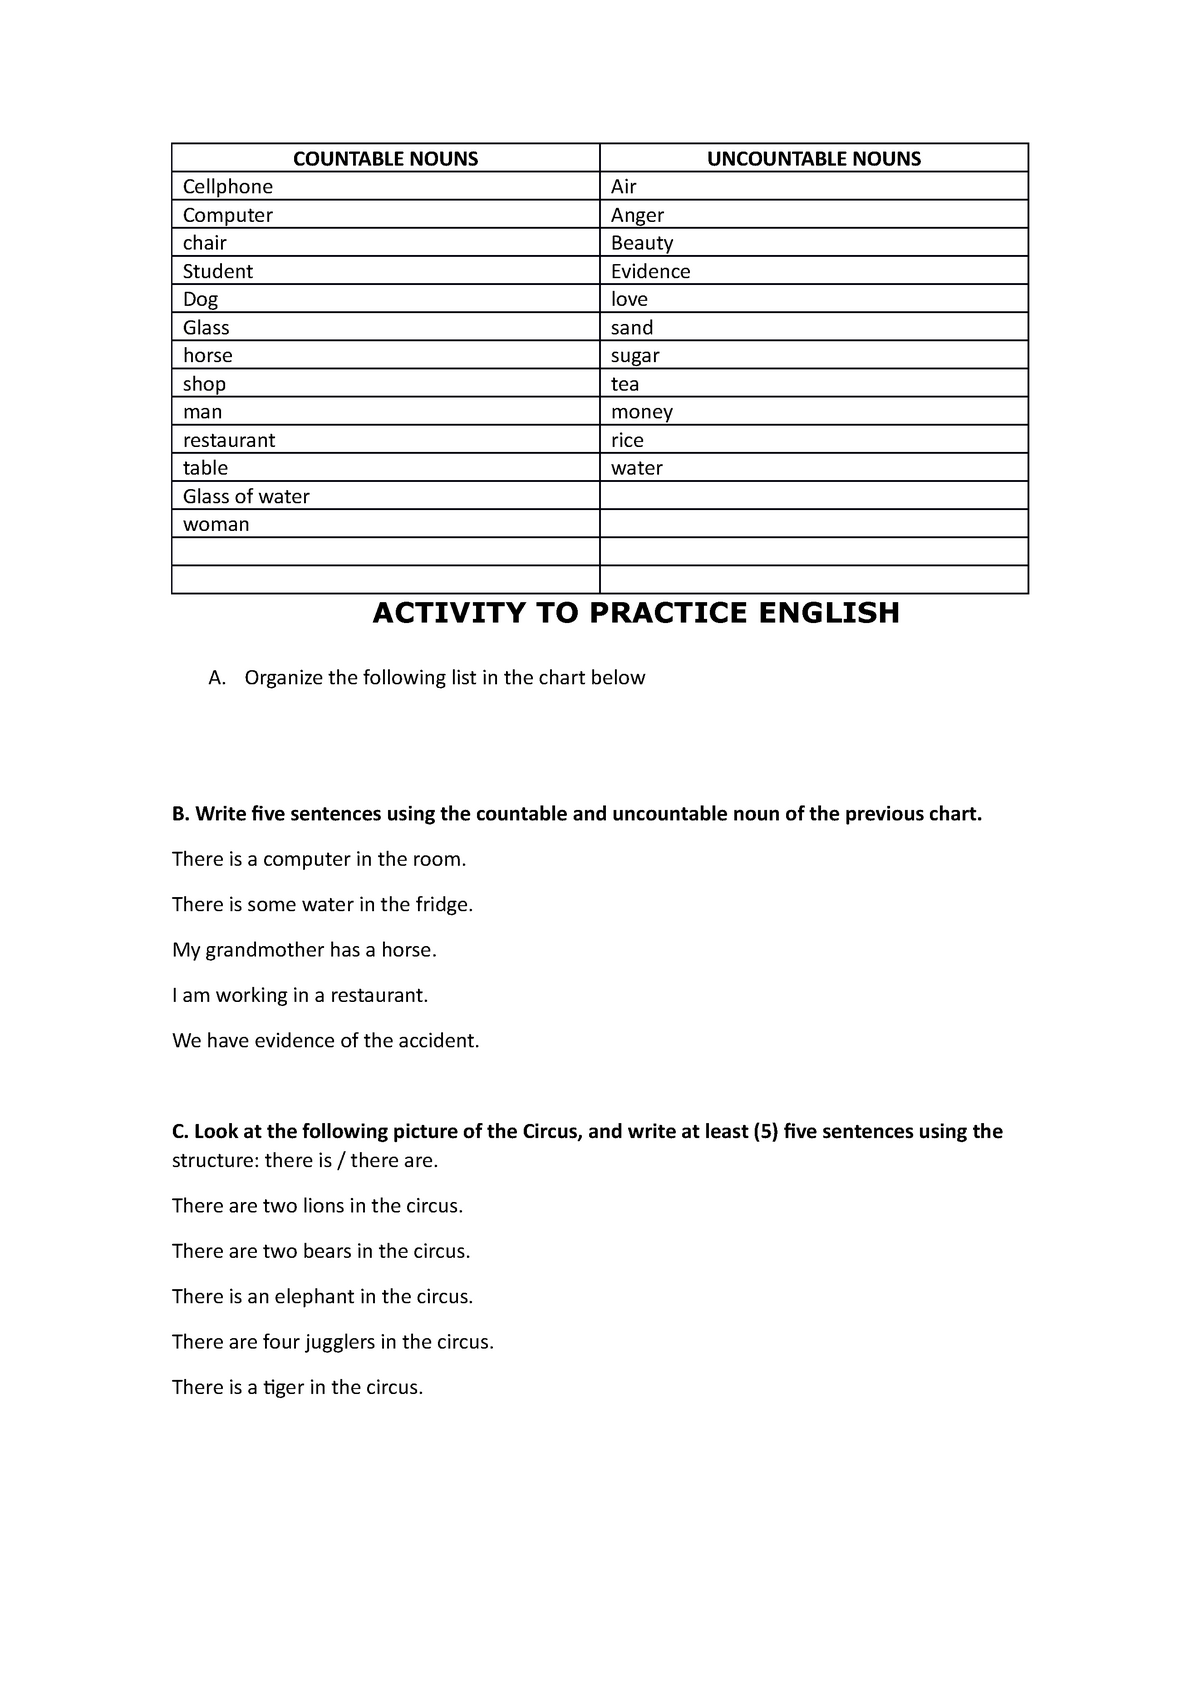 How To Practice English Online